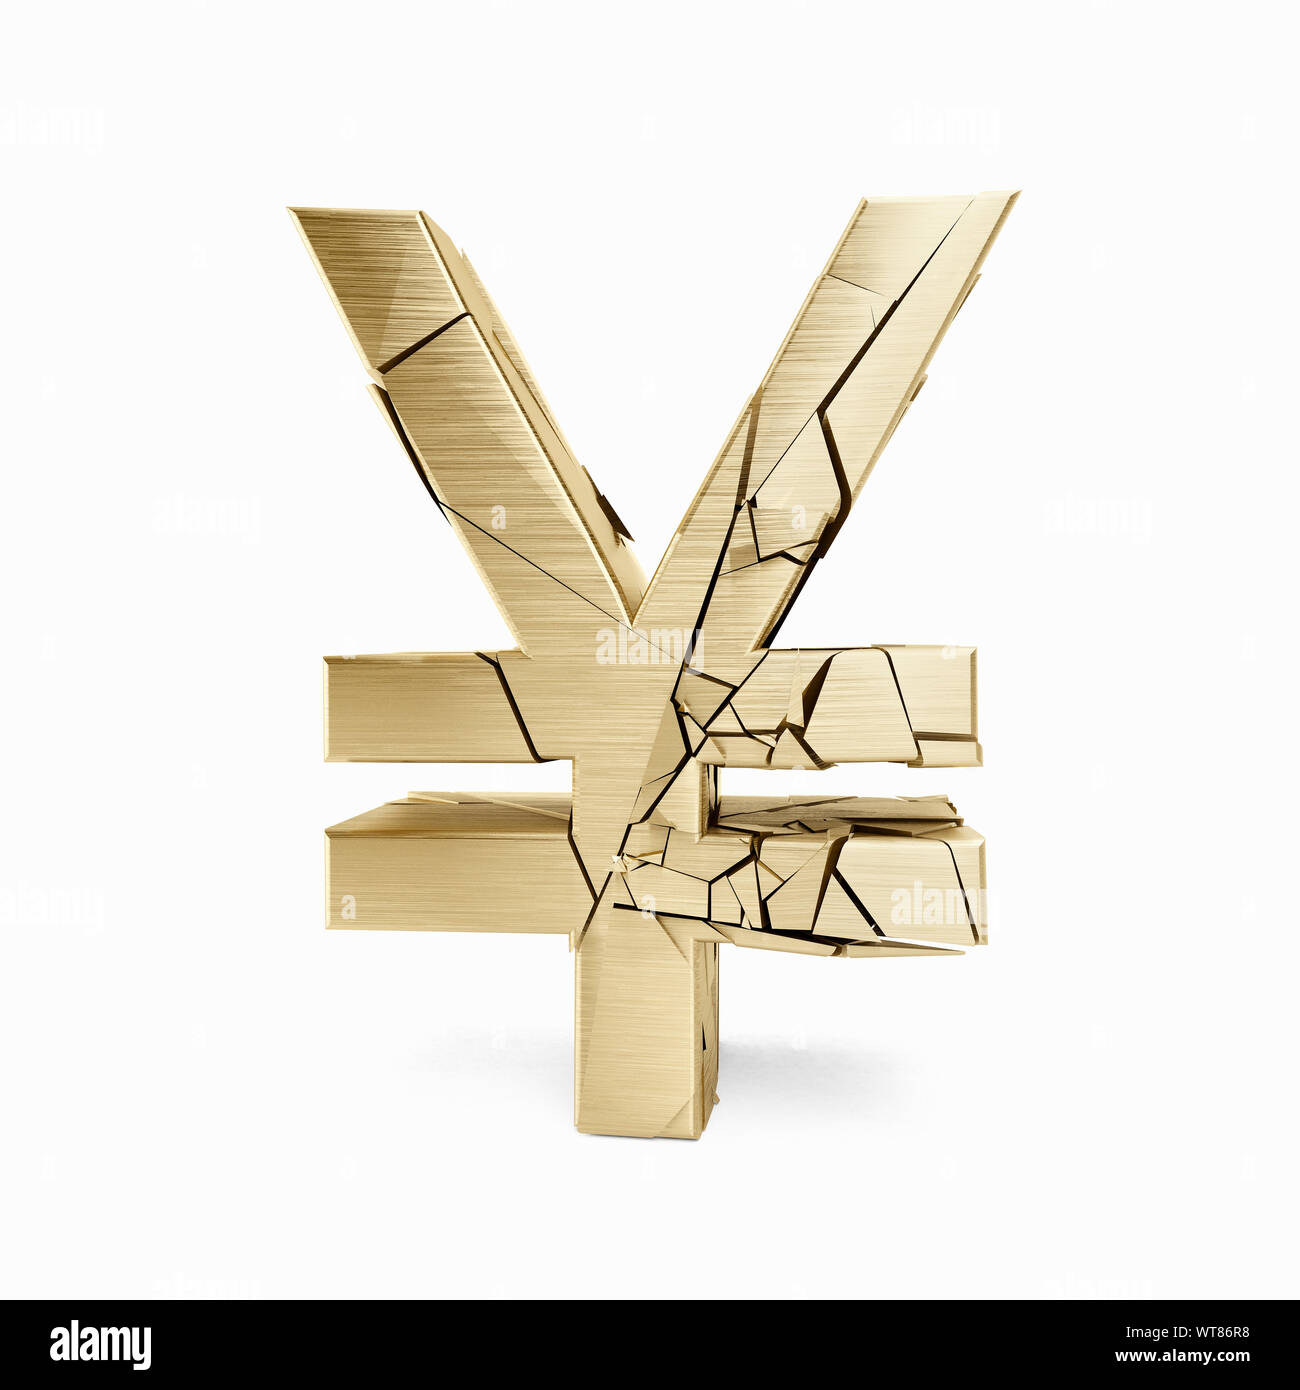 Cracked and crumbling gold Japanese Yen currency symbol, JPY Stock Photo